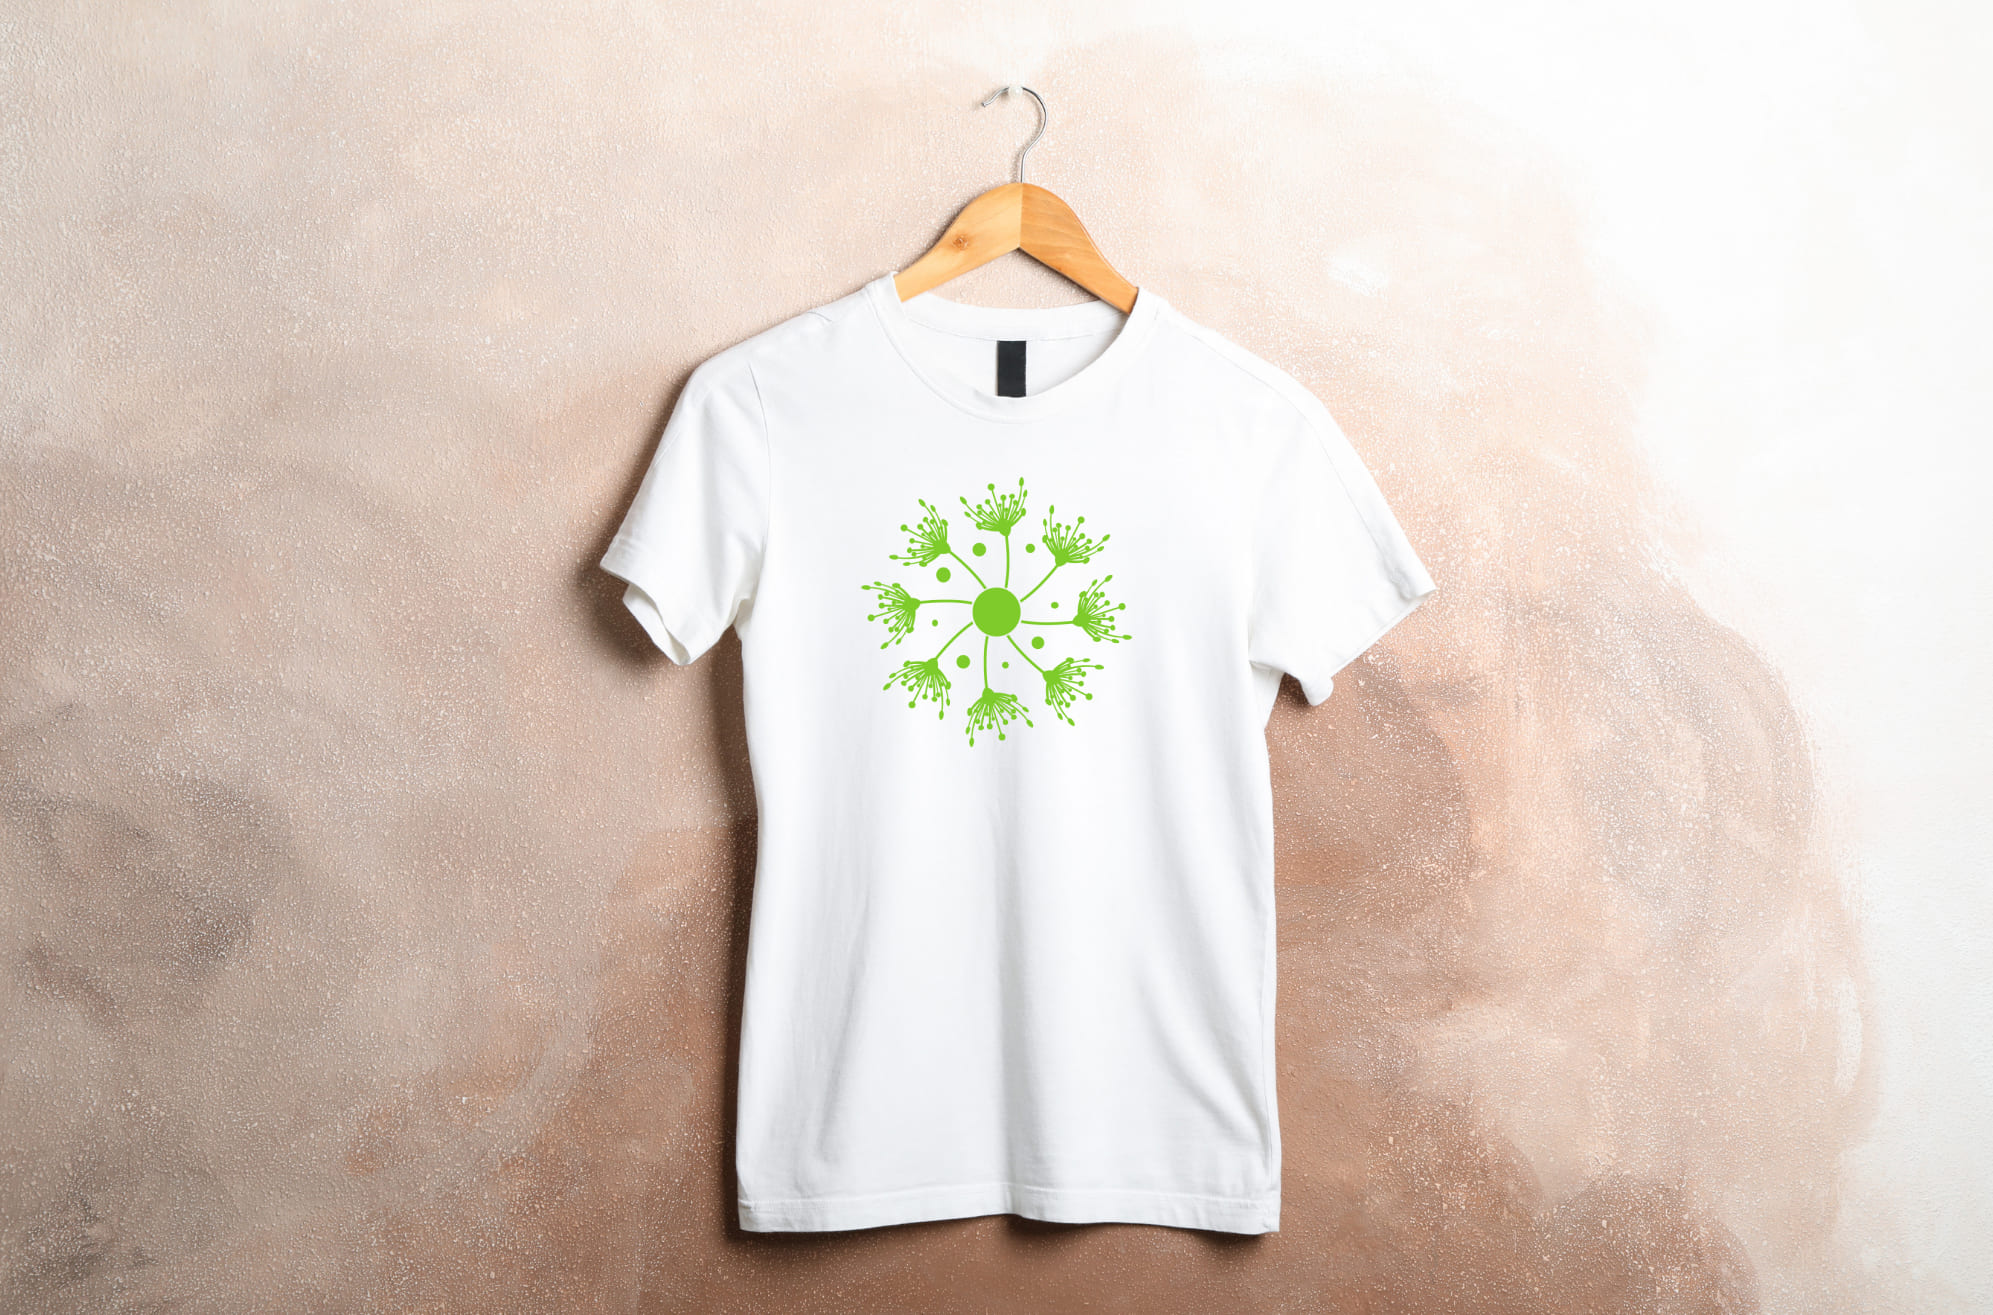 T-shirt image with gorgeous green dandelion print.